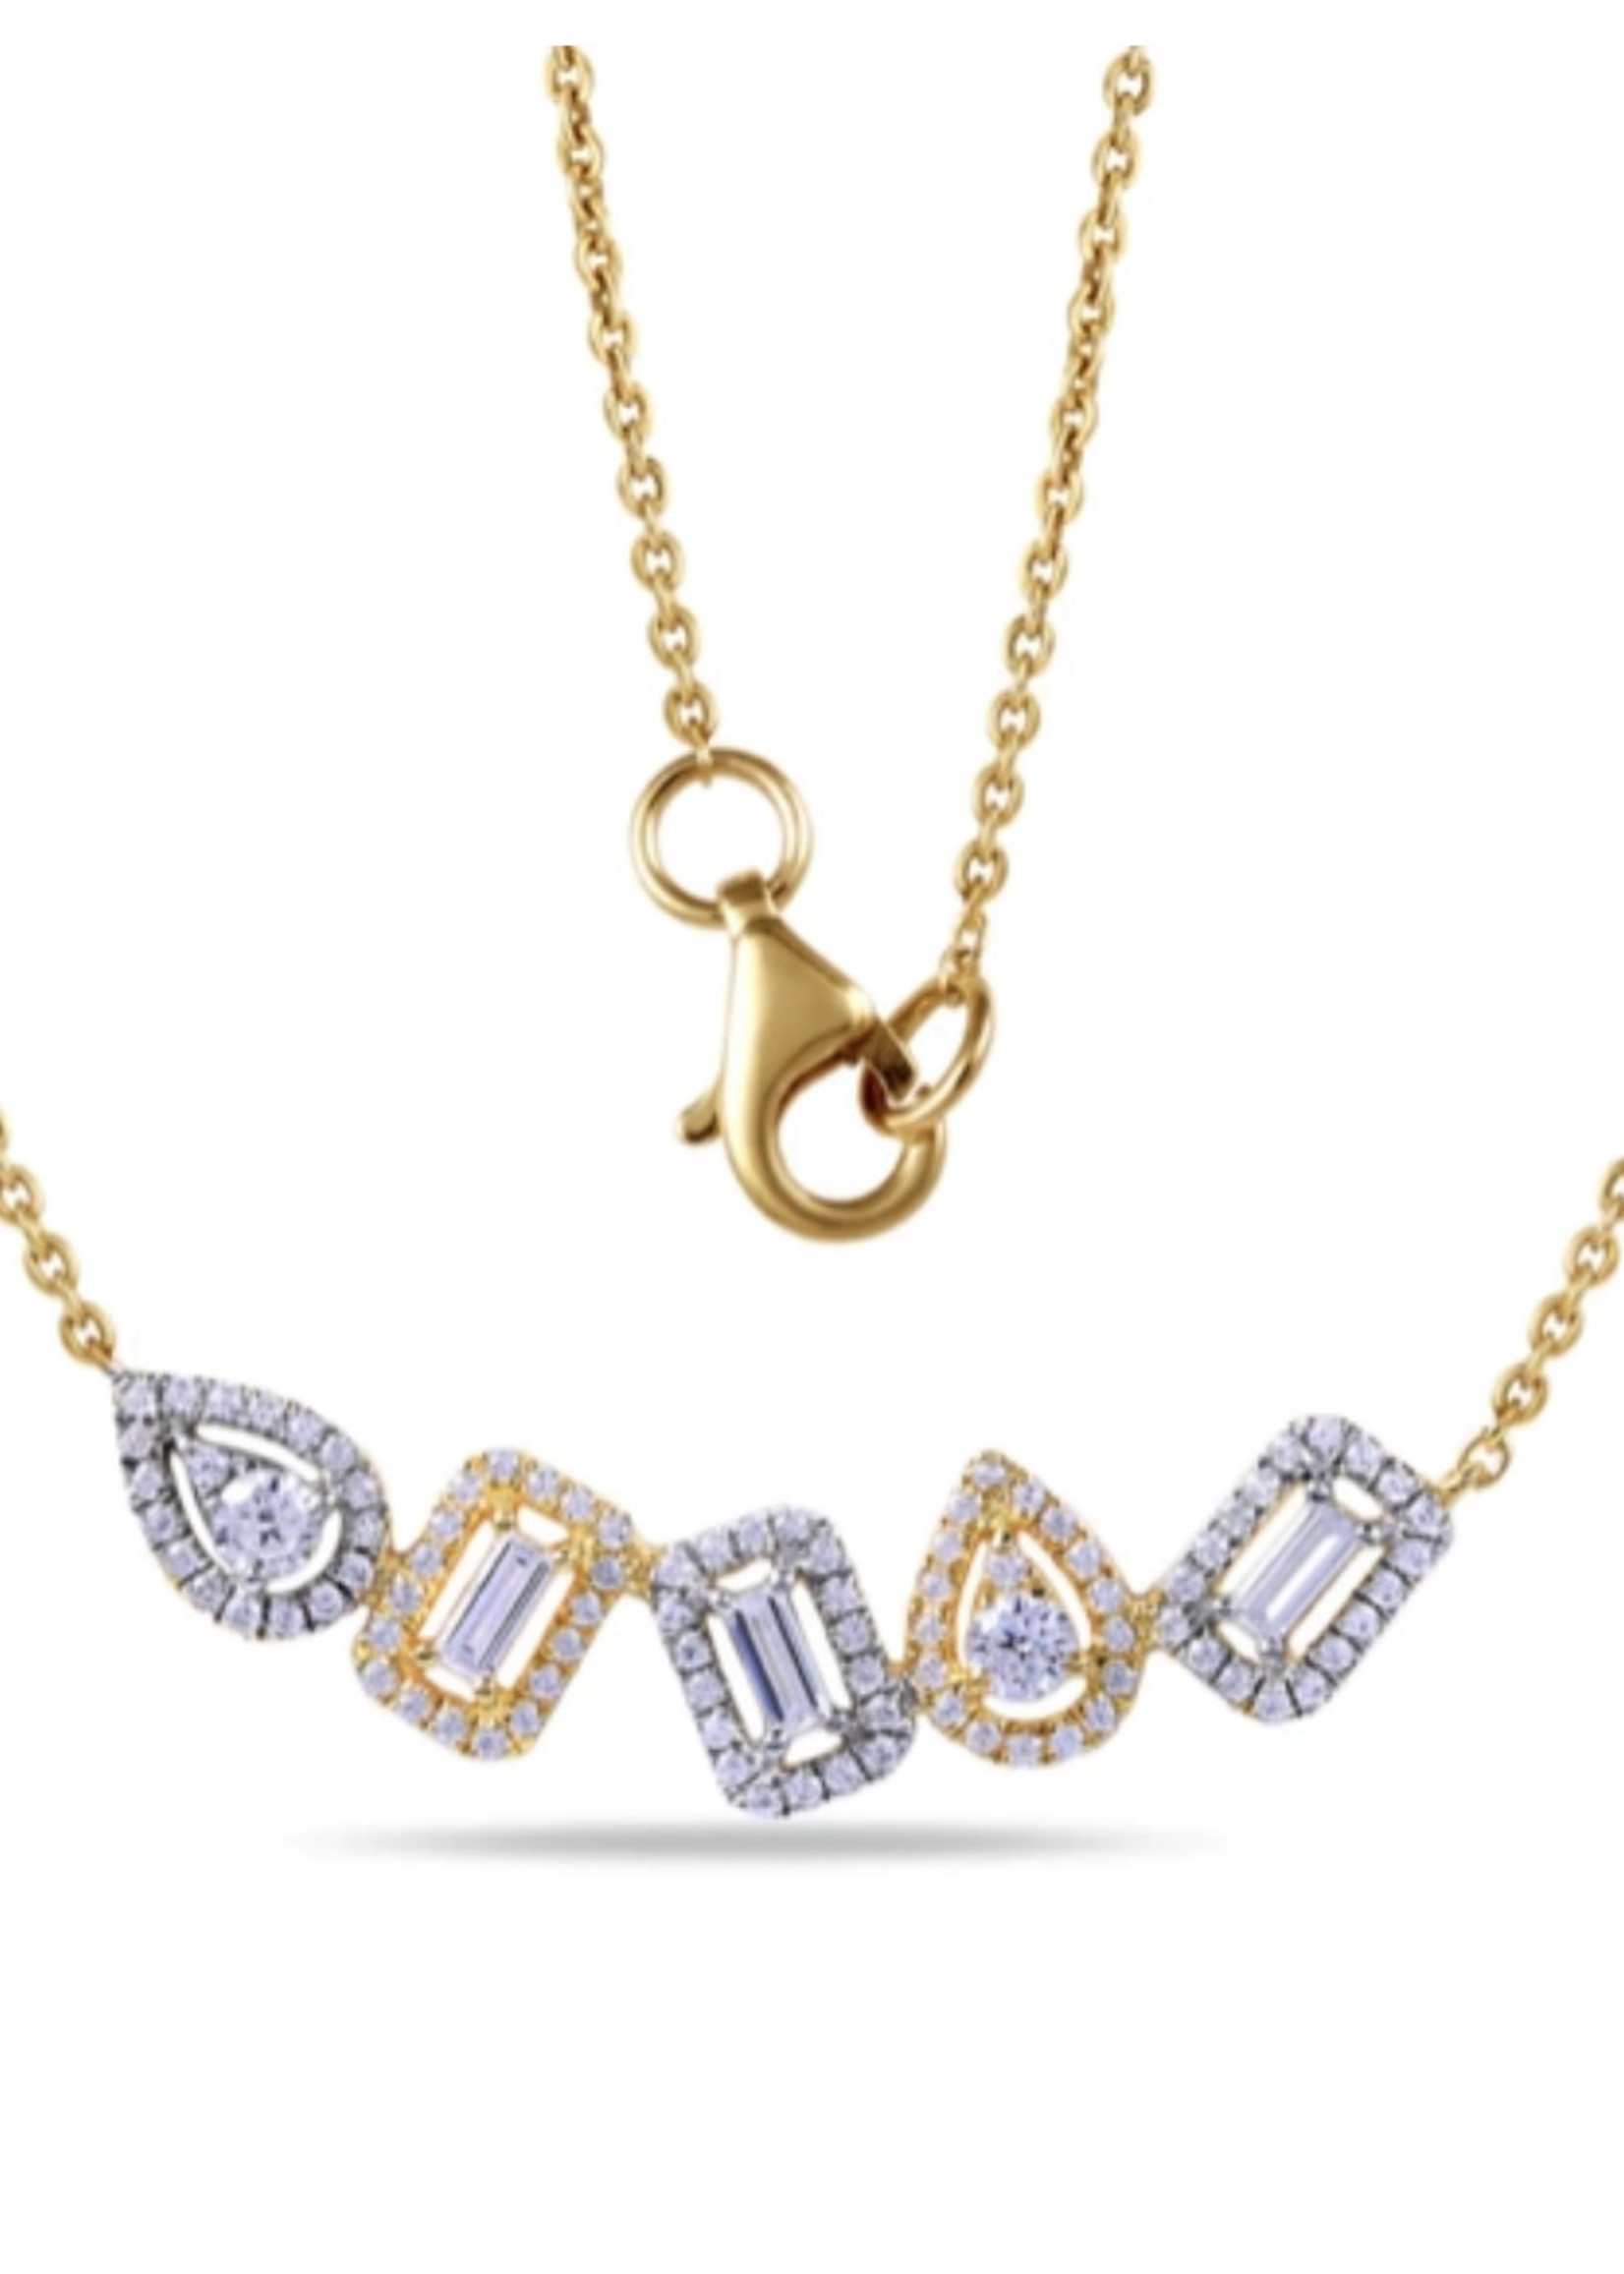 Shula NY 14kWhite &Yellow Gold.55ctw Diamond Necklace. One of our Best Sellers!